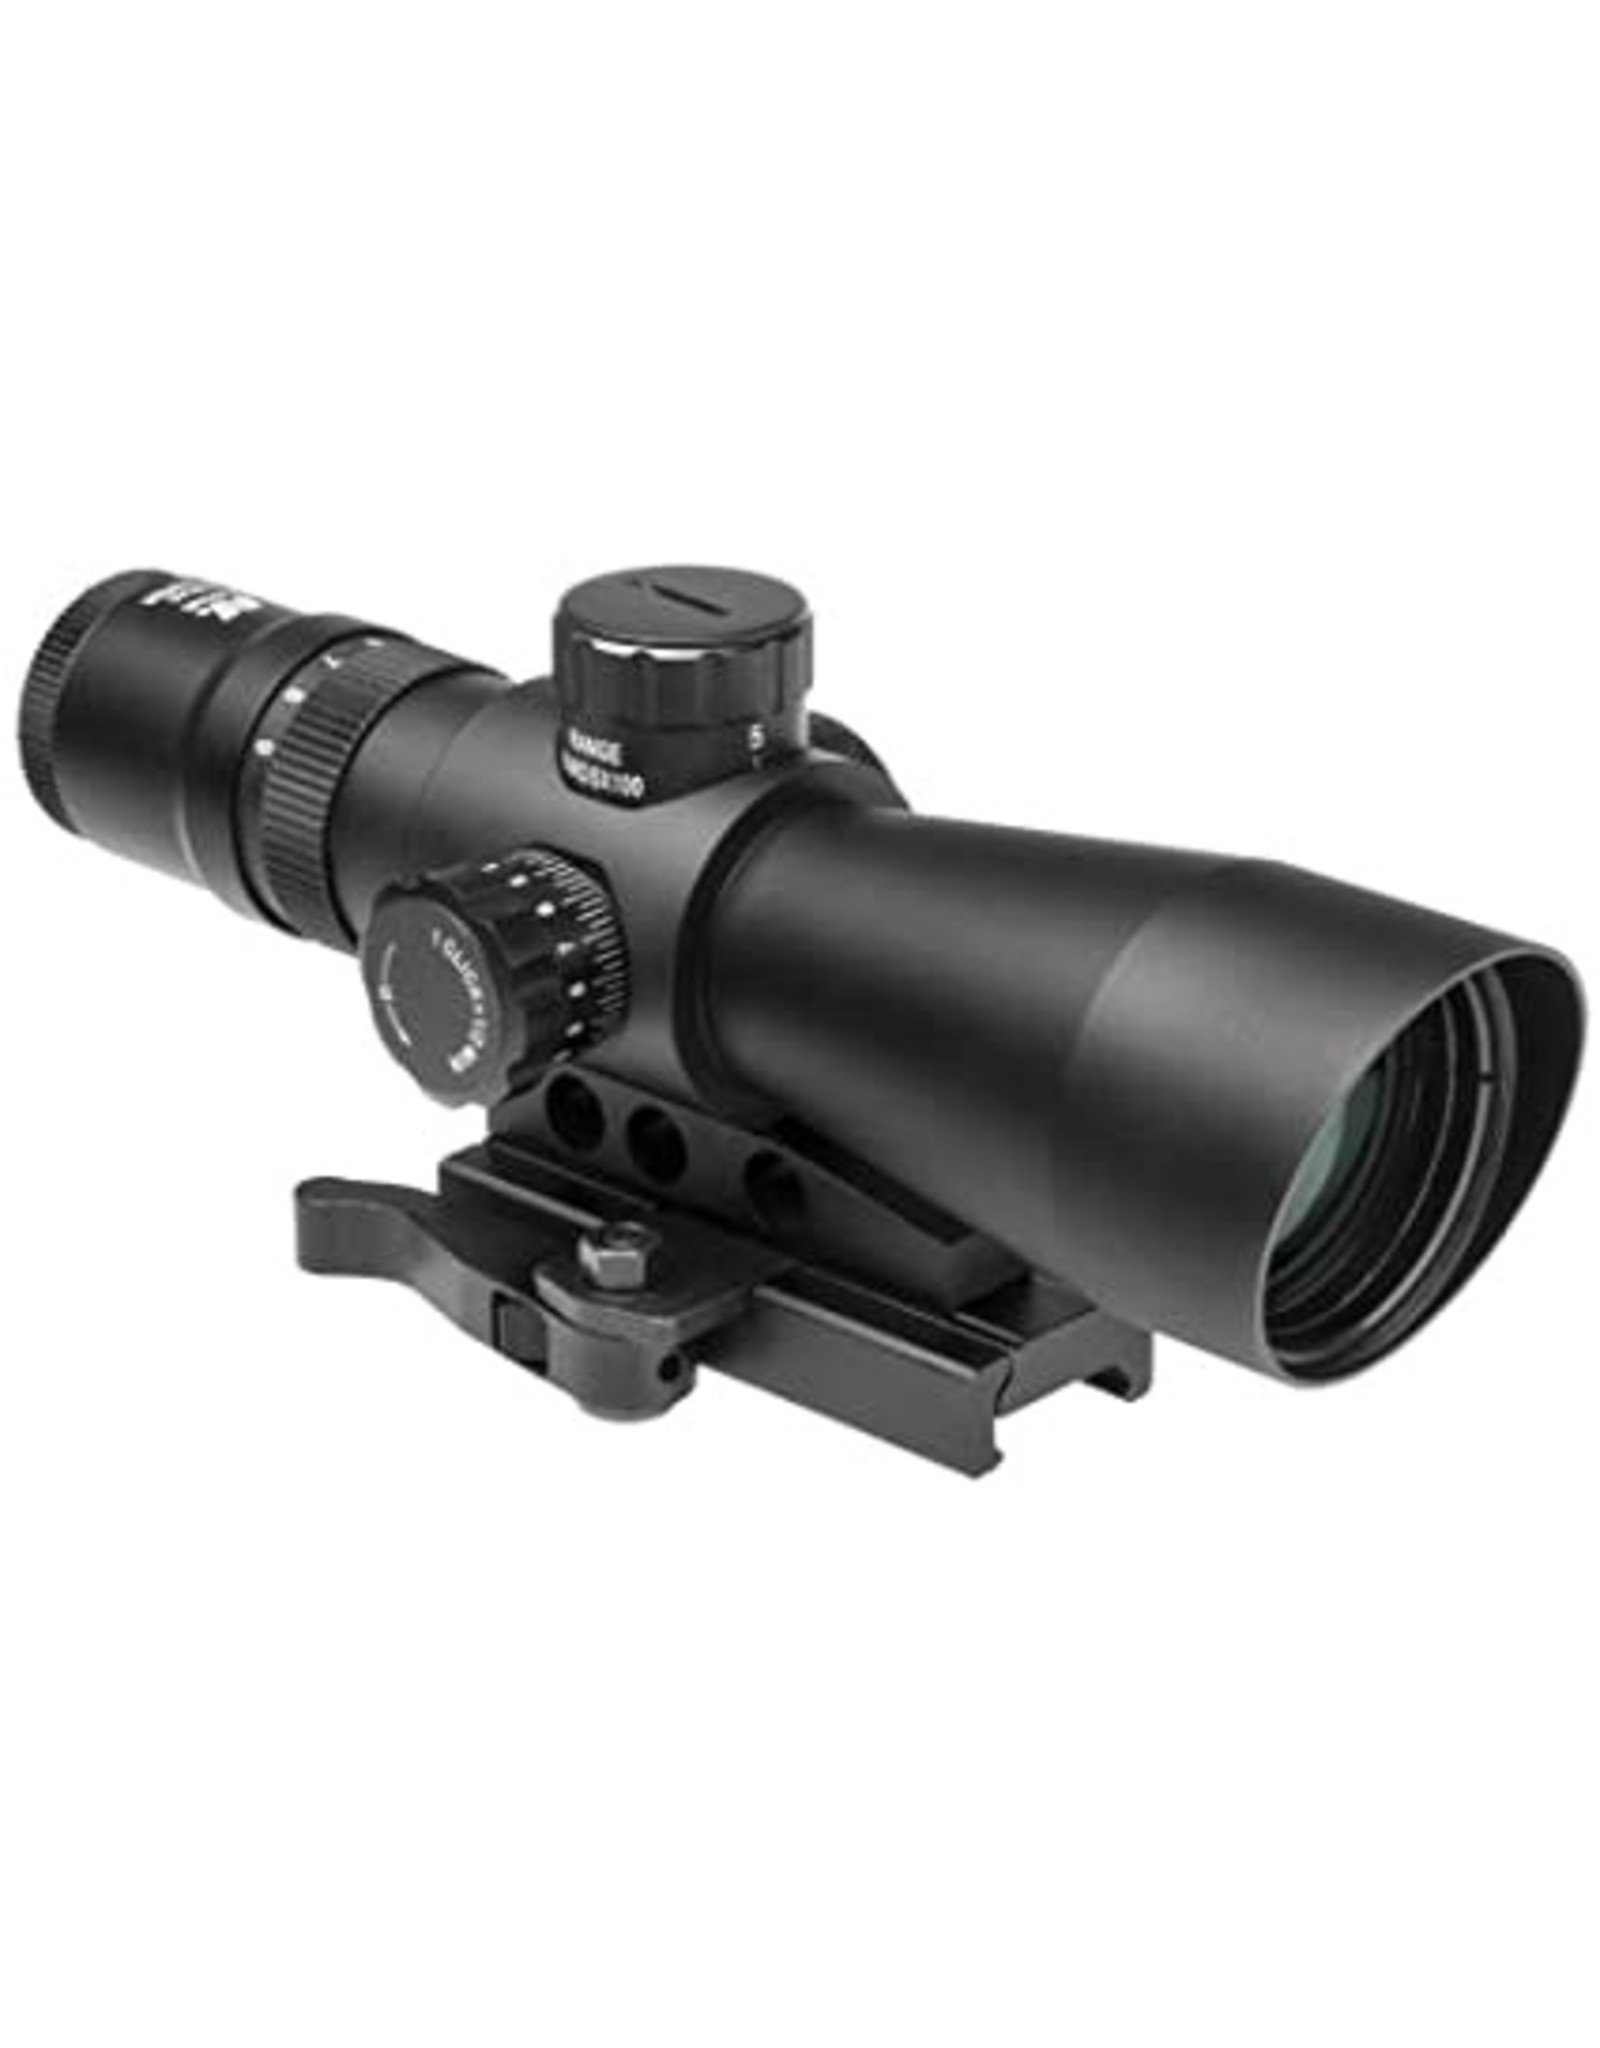 NcSTAR NCStar Mark III 3-9x42 Scope Tactical Series Gen II Red/Blue Illuminated STP3942GV2 P4 Reticle